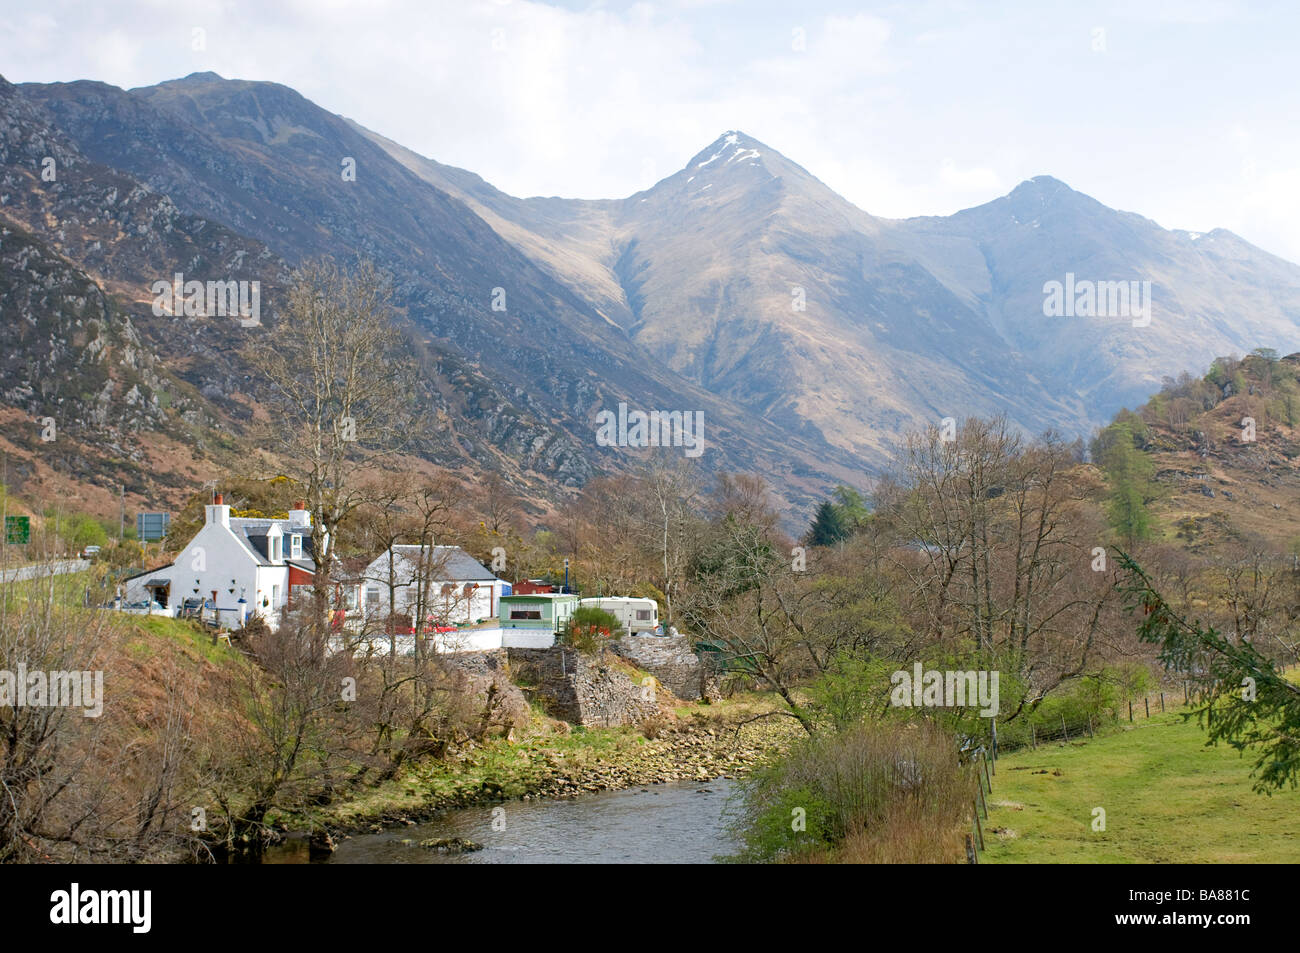 The small quiet hamlet of Shiel bridge Ross-shire overlooked by the 7 sisters of Kintail Scottish Highlands.   SCO 2375 Stock Photo